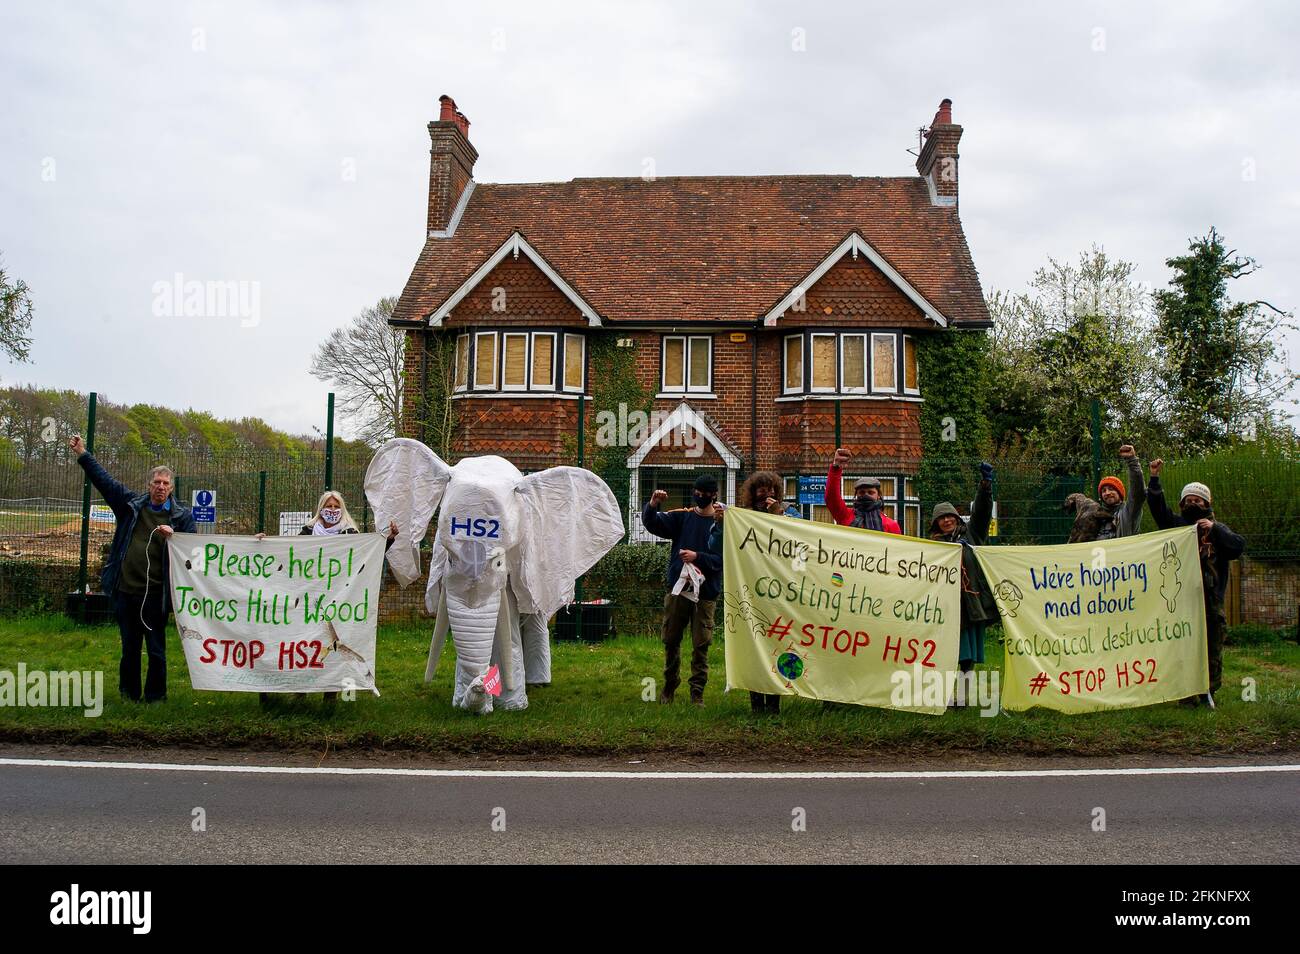 Wendover, Buckinghamshire, UK. 29th April, 2021. Stop HS2 activists were outside Road Barn Farm in Wendover today with a life size white elephant. Locals are furious that HS2 have destroyed a huge area of woodland on the farm in preparation for building a bentonite factory. The farmhouse and barns are to be demolished by HS2 too. The costs of the High Speed 2 HS2 railway from London to Birmingham are spiralling out of control. HS2 puts 108 ancient woodlands, 33 SSSIs and 693 wildlife sites at risk. Credit: Maureen McLean/Alamy Stock Photo